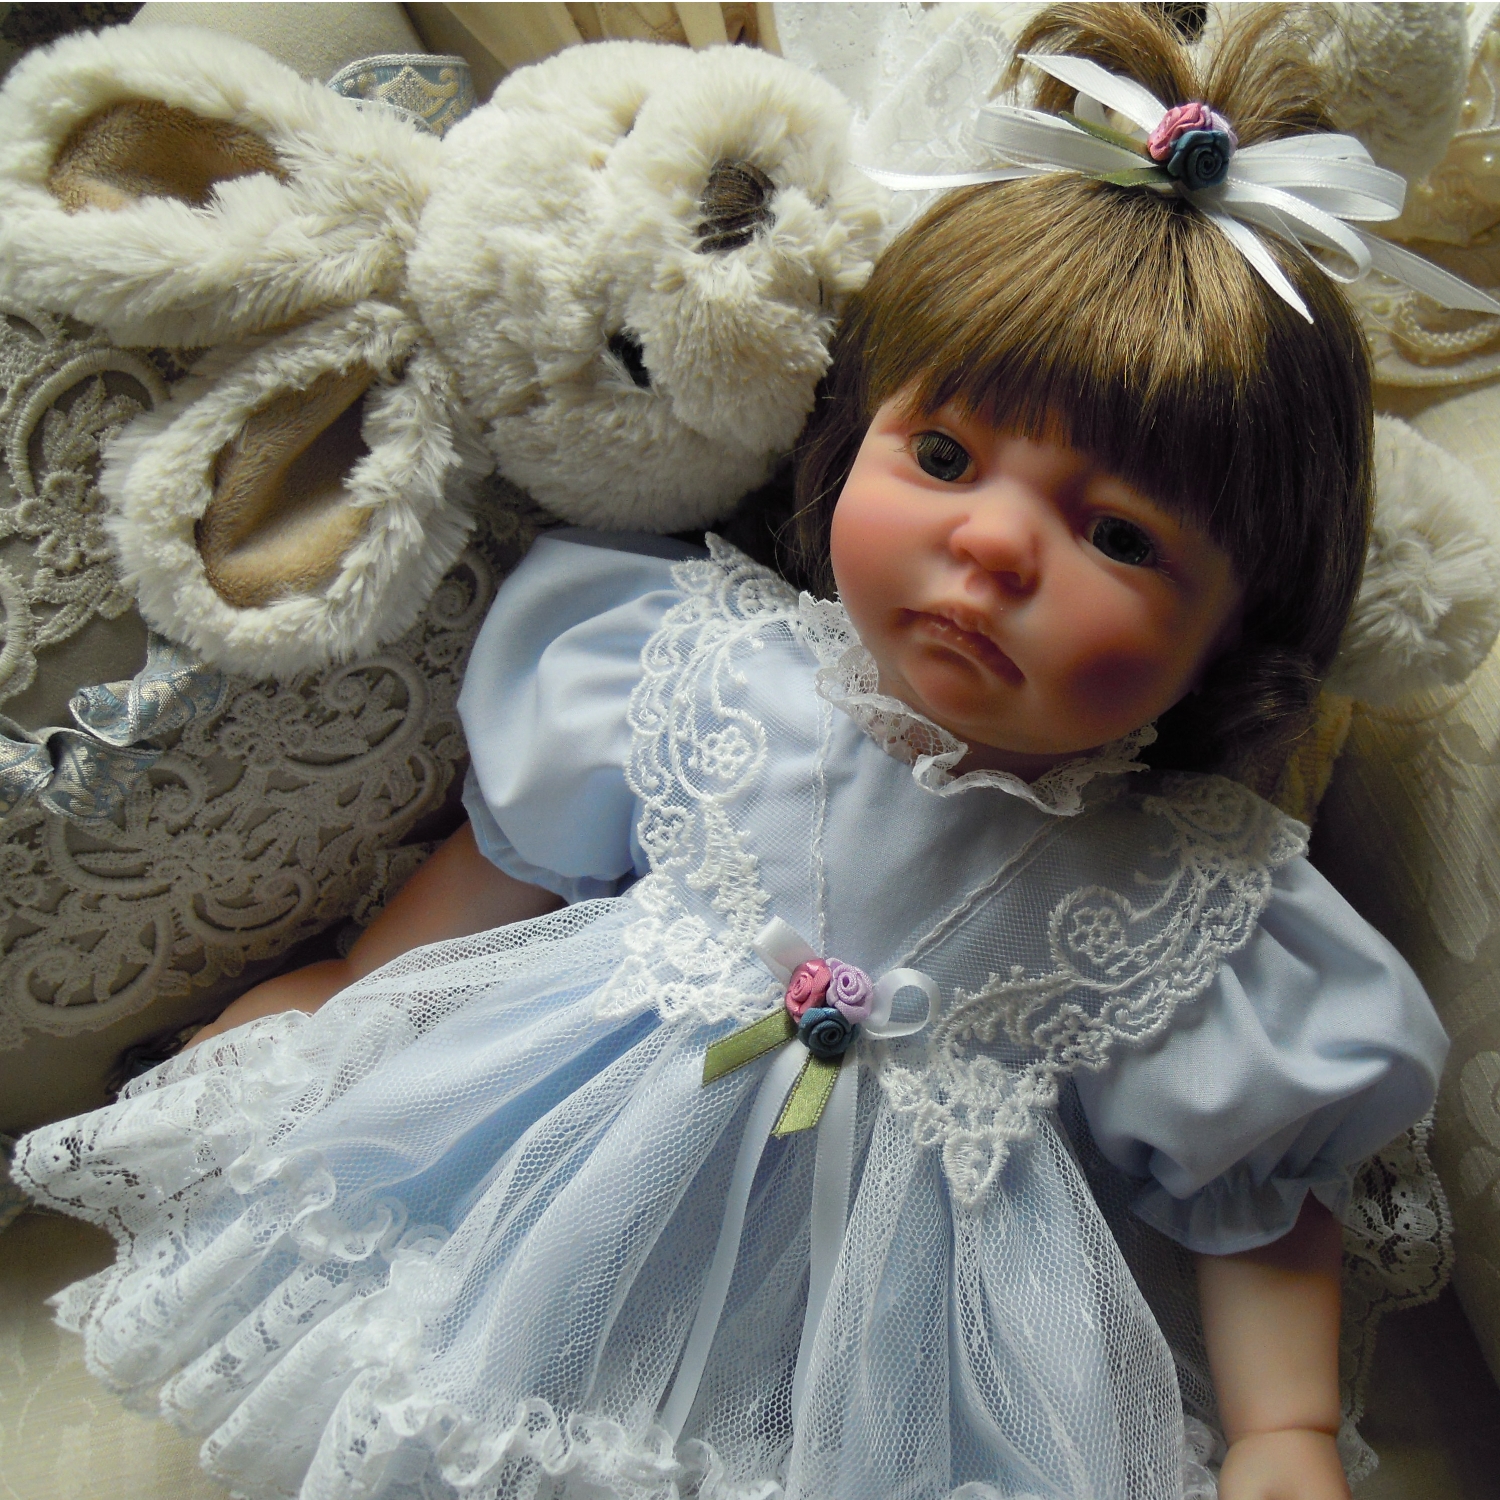 Baby Dolls That Look Real